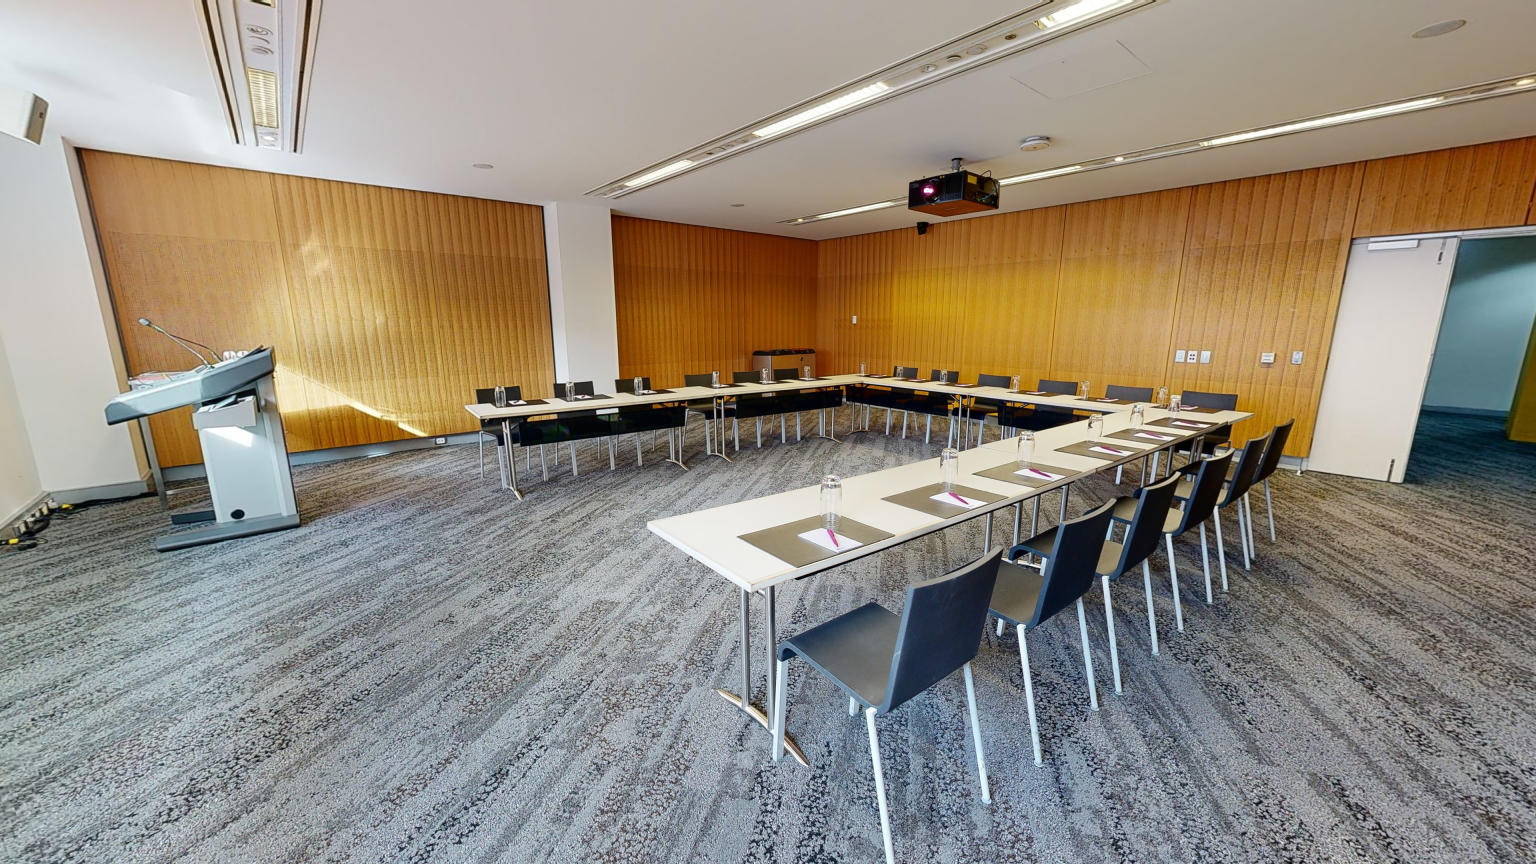 A meeting or conference room with tables and chairs arranged in a u-shaped boardroom configuration. The tables and chairs are facing a and lectern.